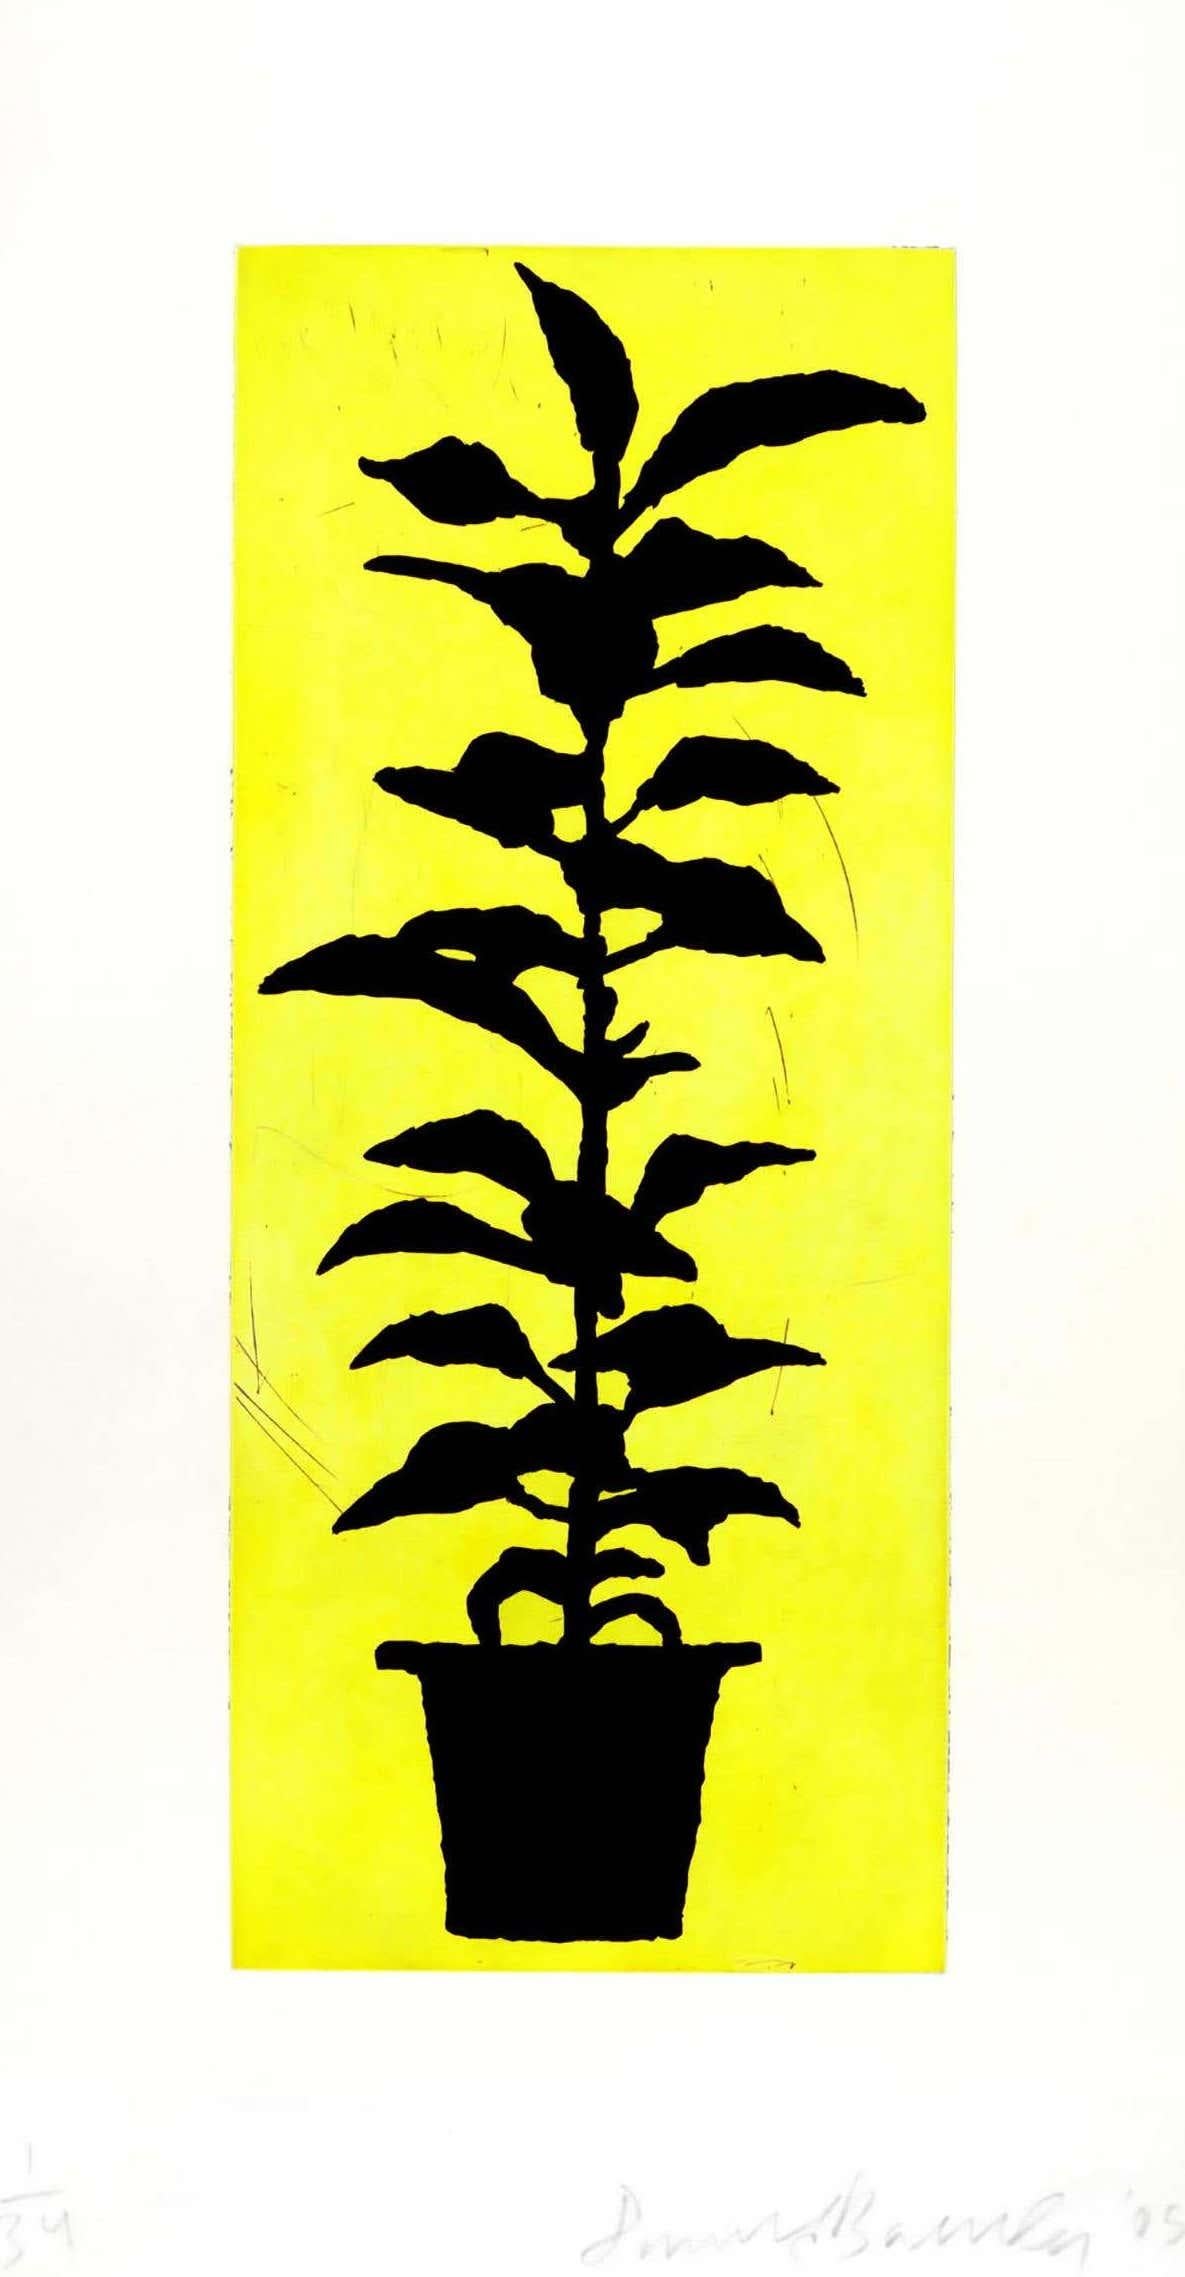 Donald Baechler, Potted Plant, 2005
A fun, whimsical, and highly decorative signed limited edition Baechler piece that works well in any setting.  

Medium: Aquatint and drypoint on Somerset paper.
Plate size: 24 x 10 inches
Sheet size: 32 x 17